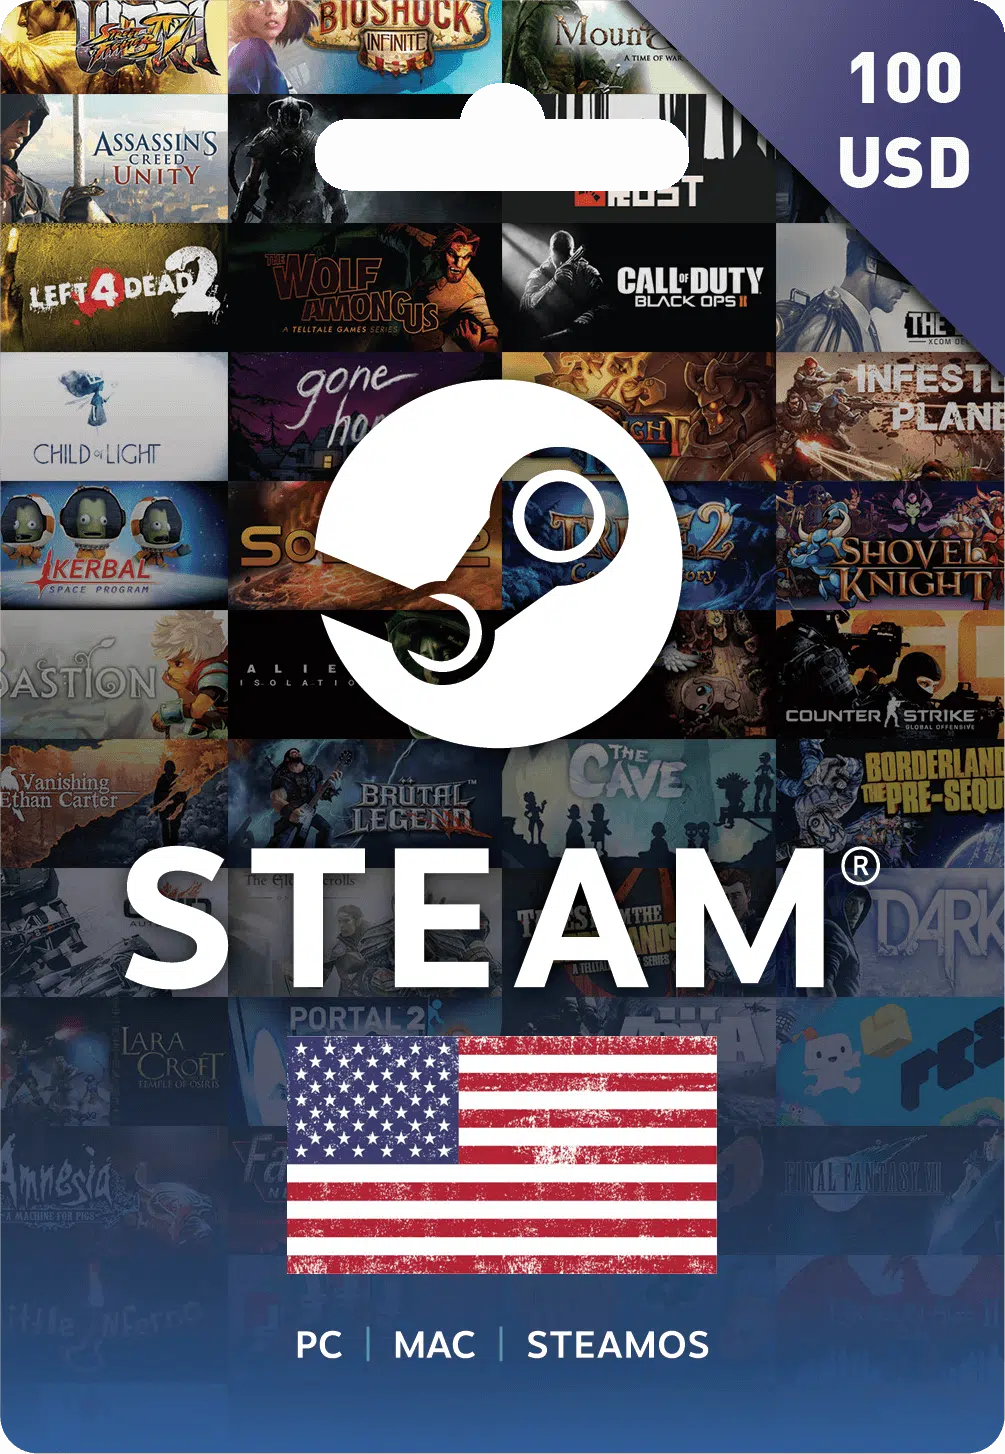 Buy Steam Wallet Codes 100 USD Now IaM A Live Store